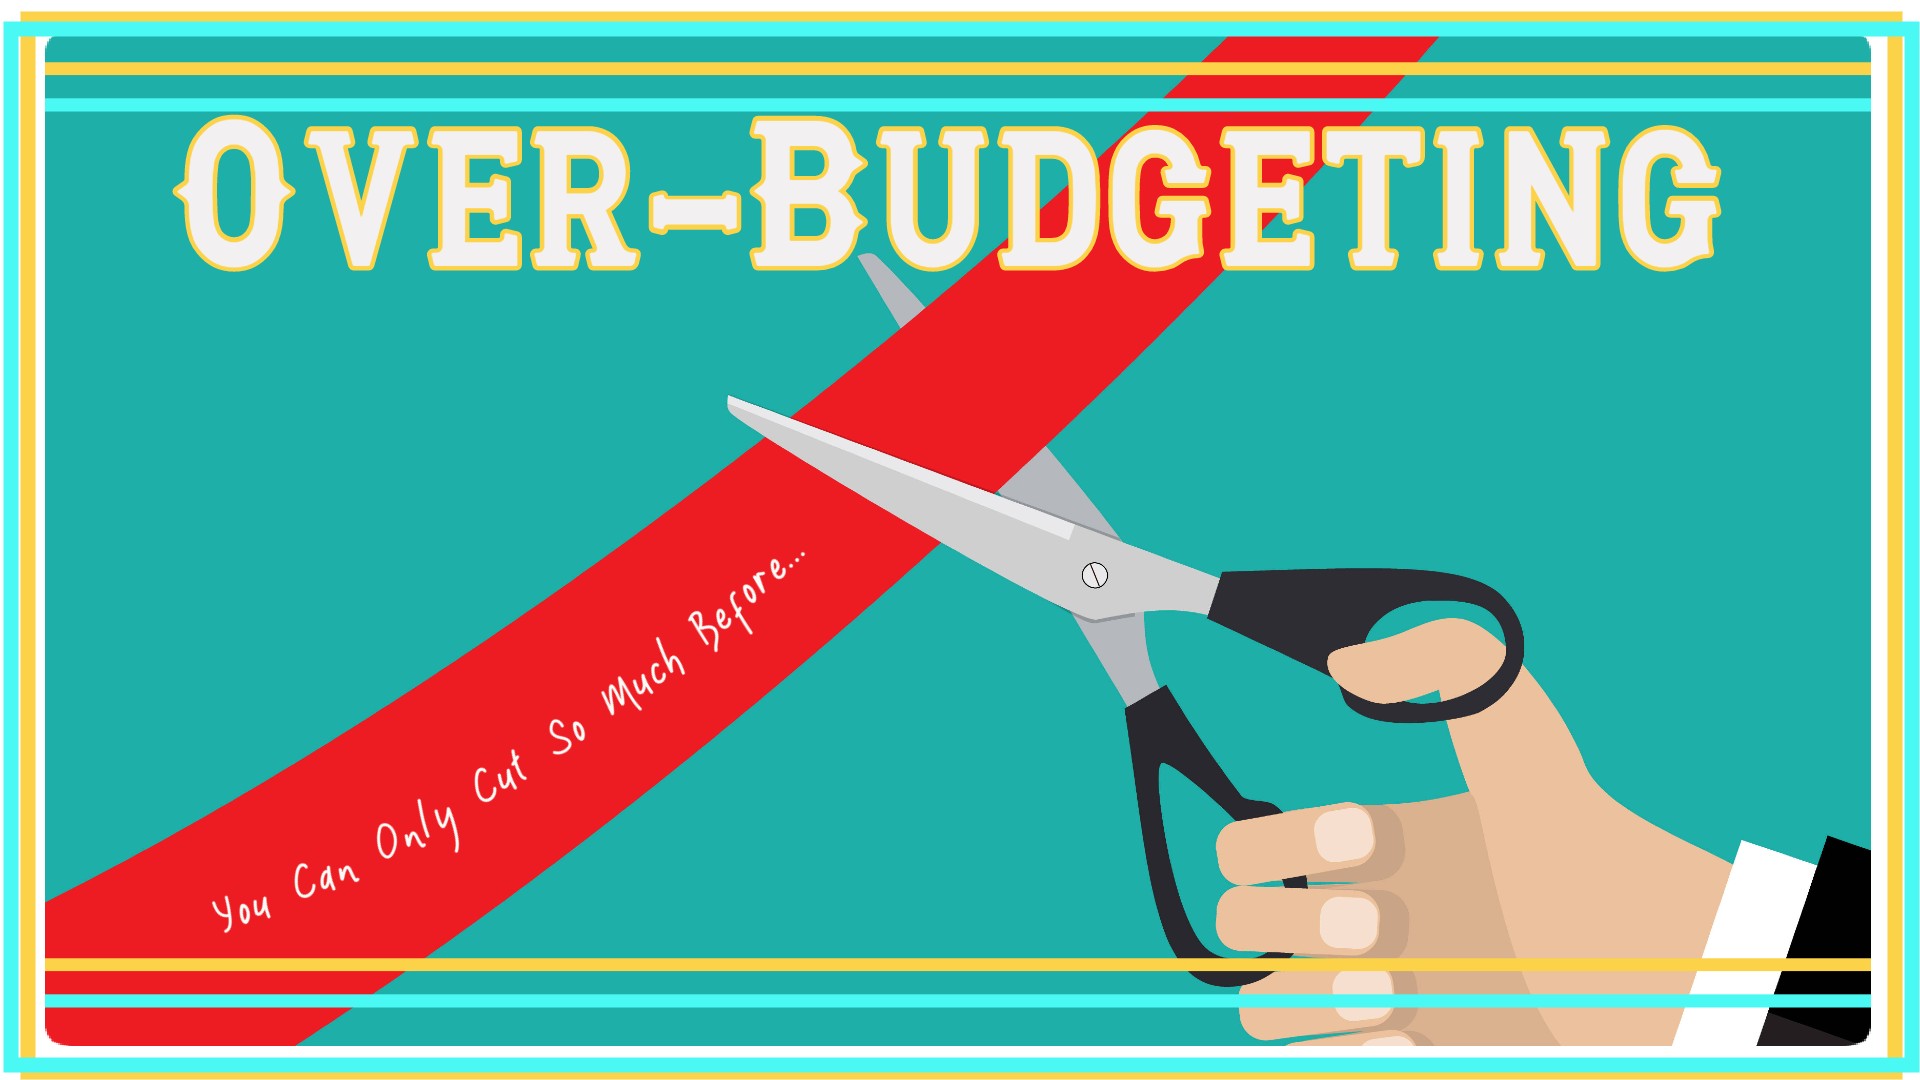 Over-Budgeting: You Can Only Cut So Much Before…